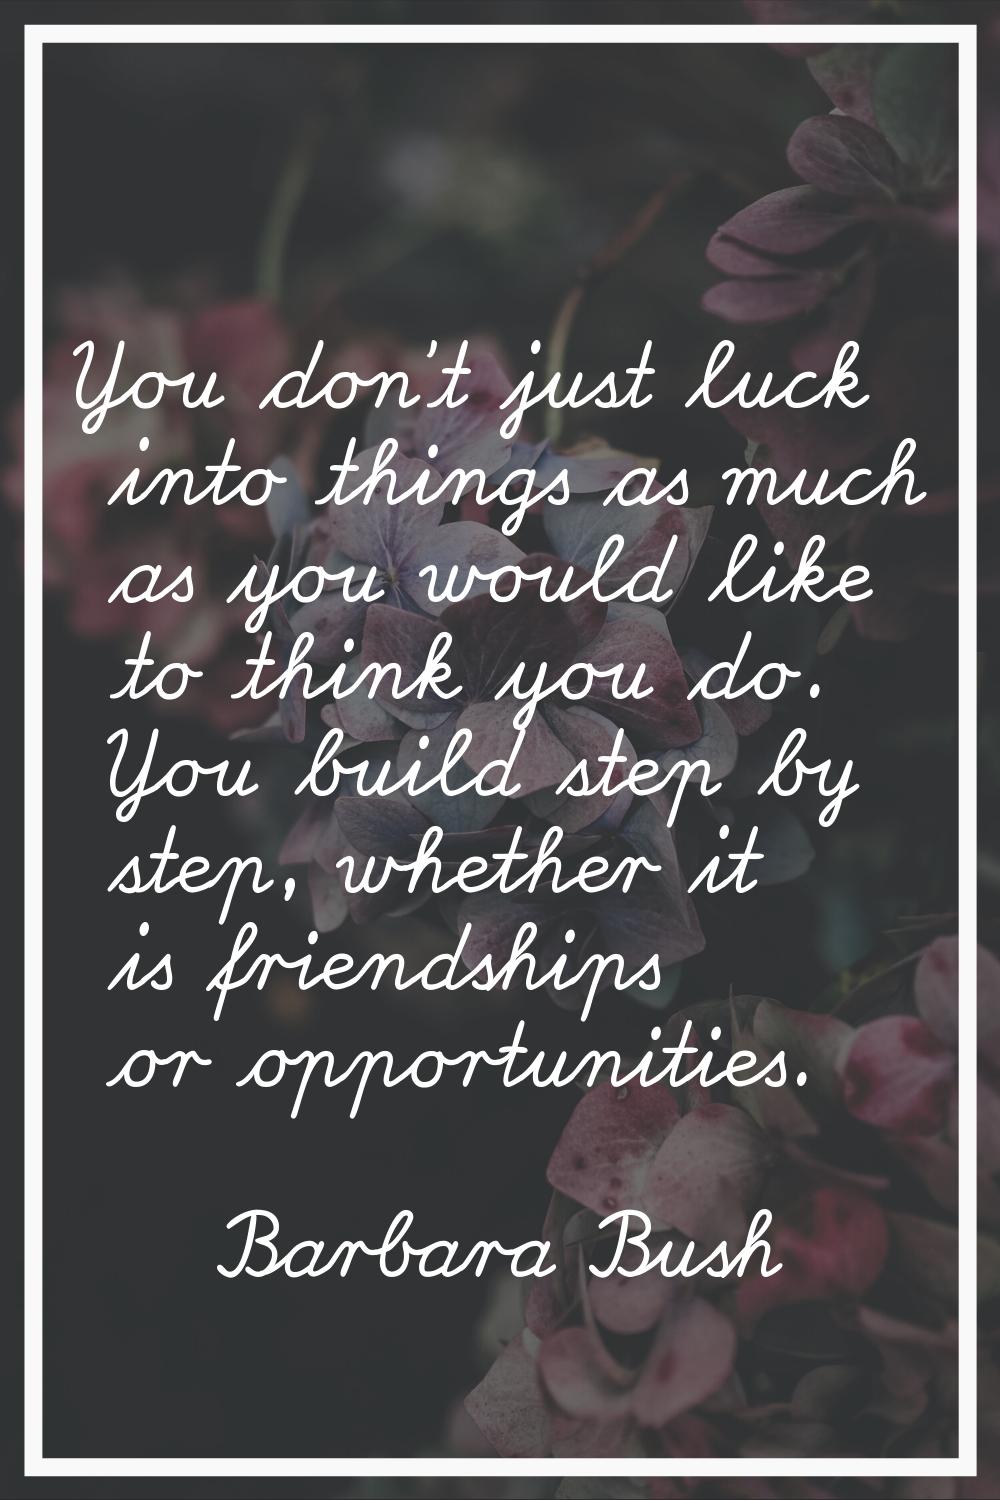 You don't just luck into things as much as you would like to think you do. You build step by step, 